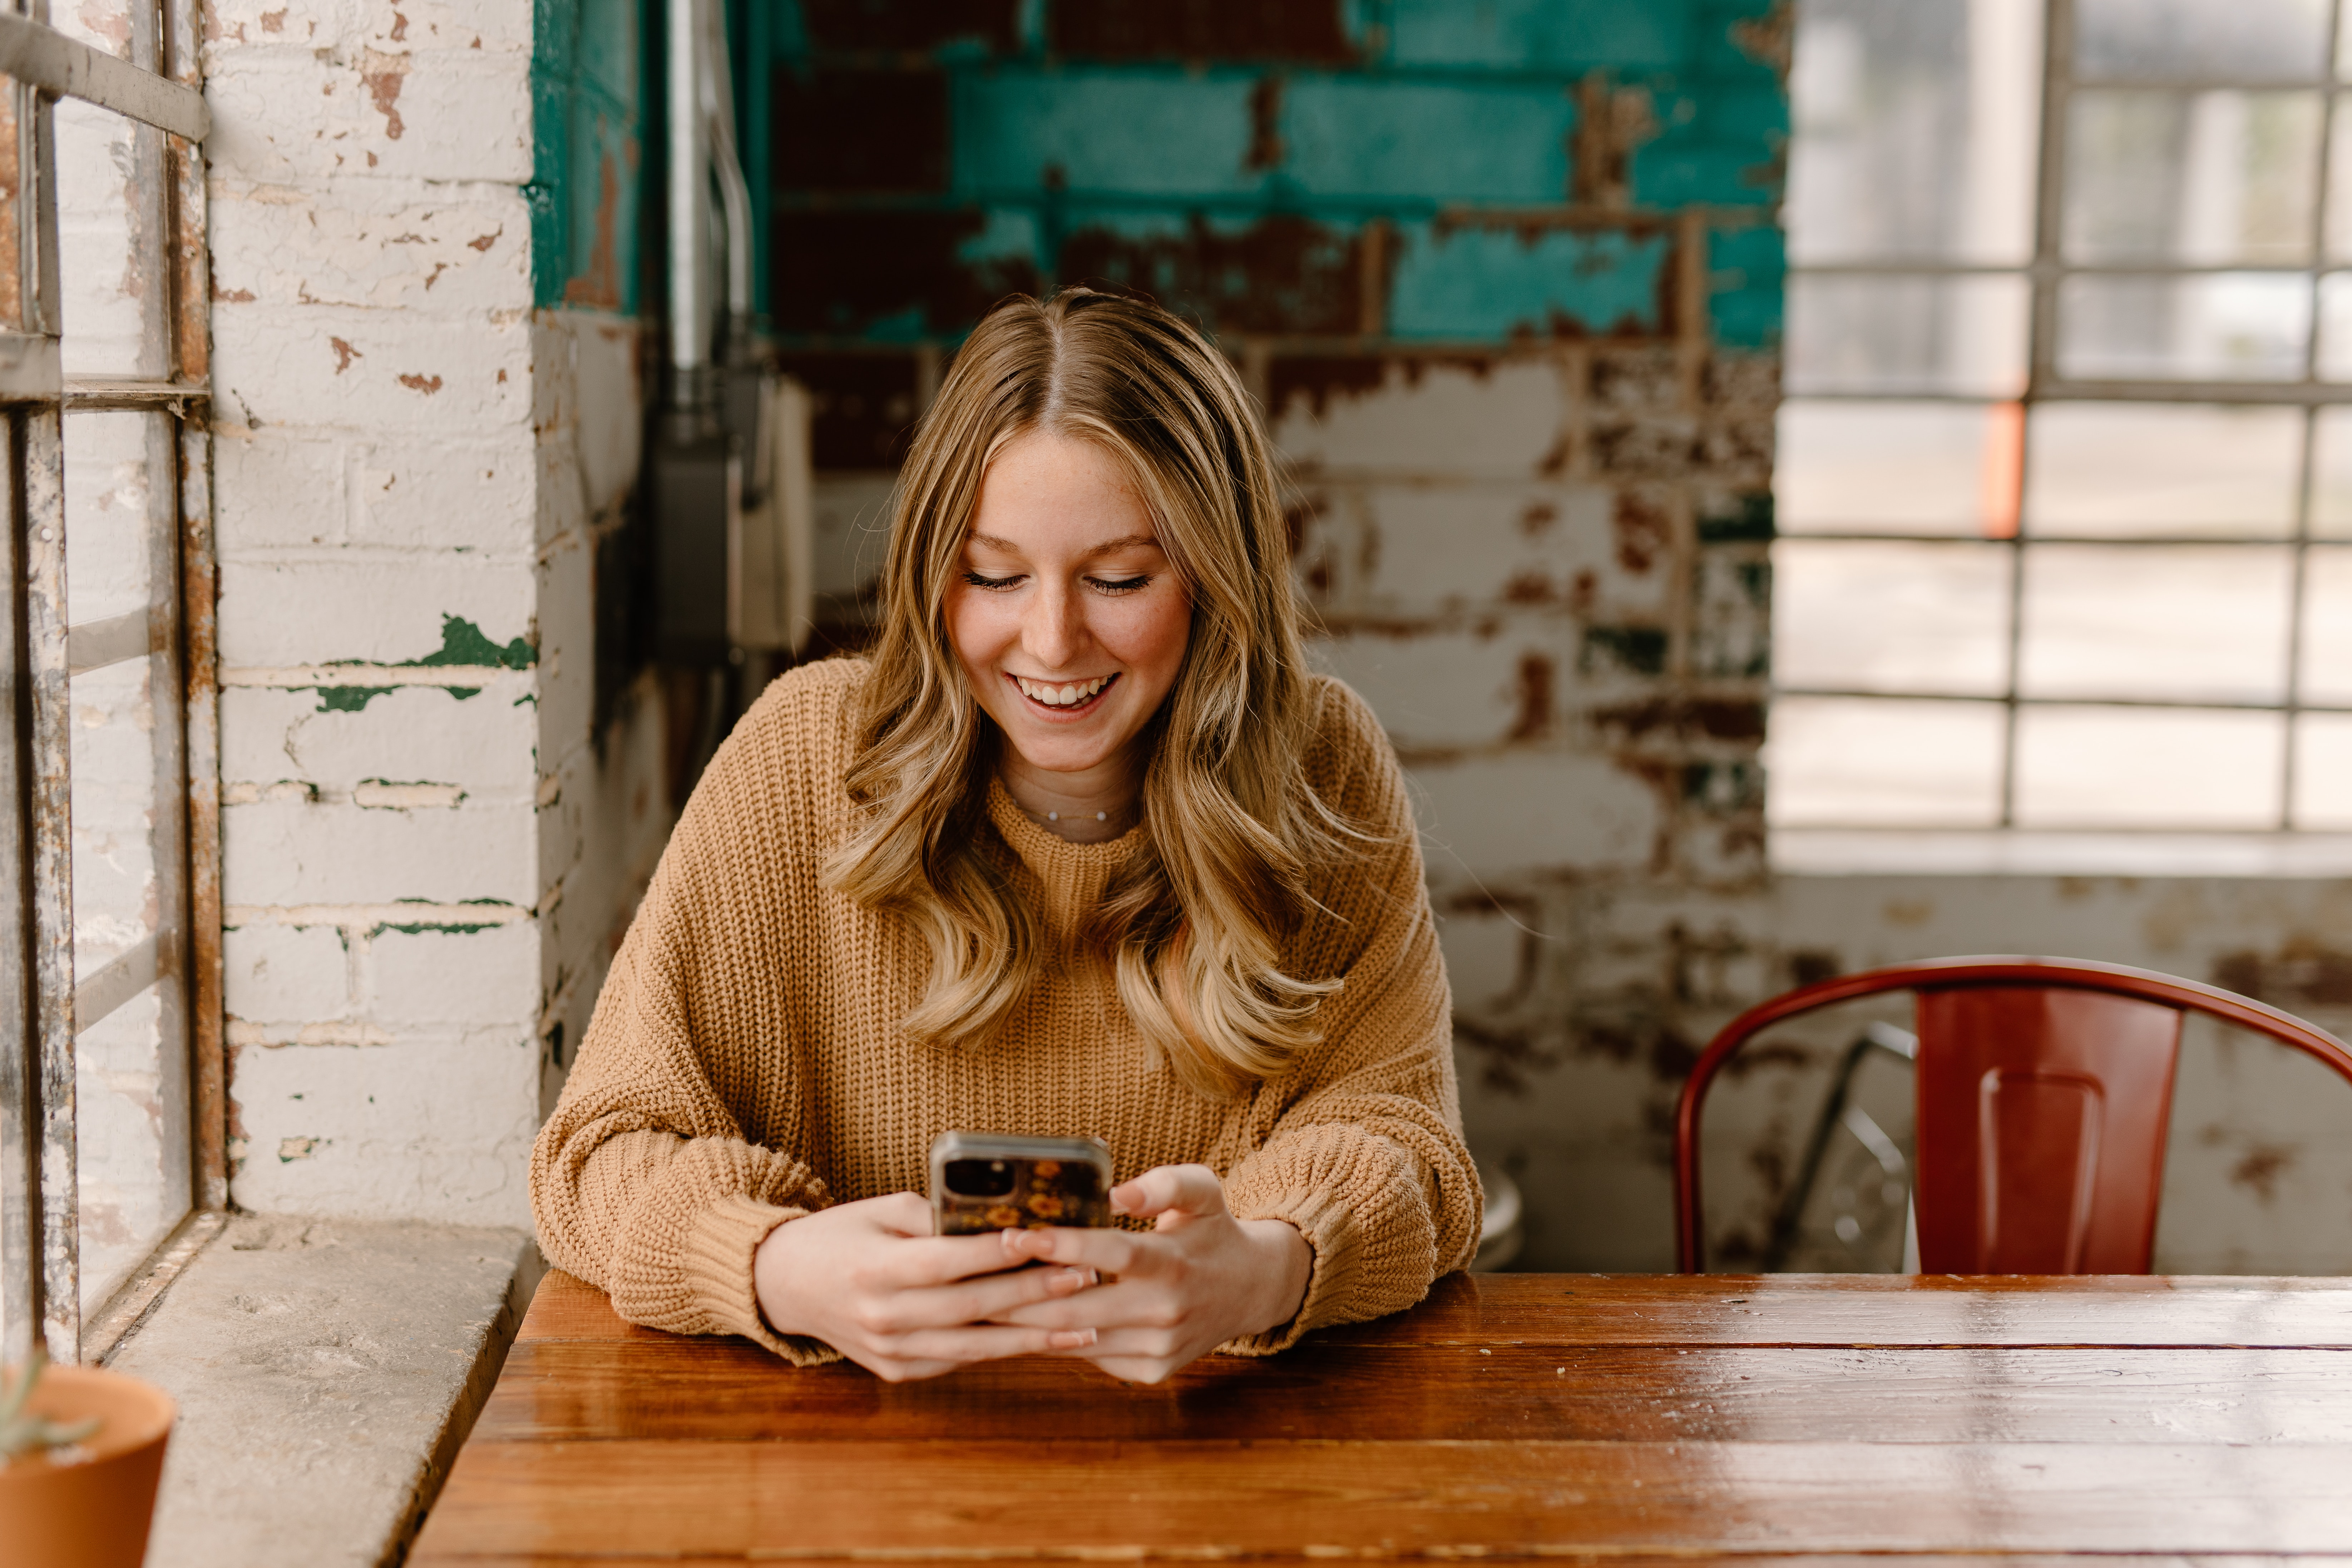 Blonde woman sits at a wooden table and messages on her phone.